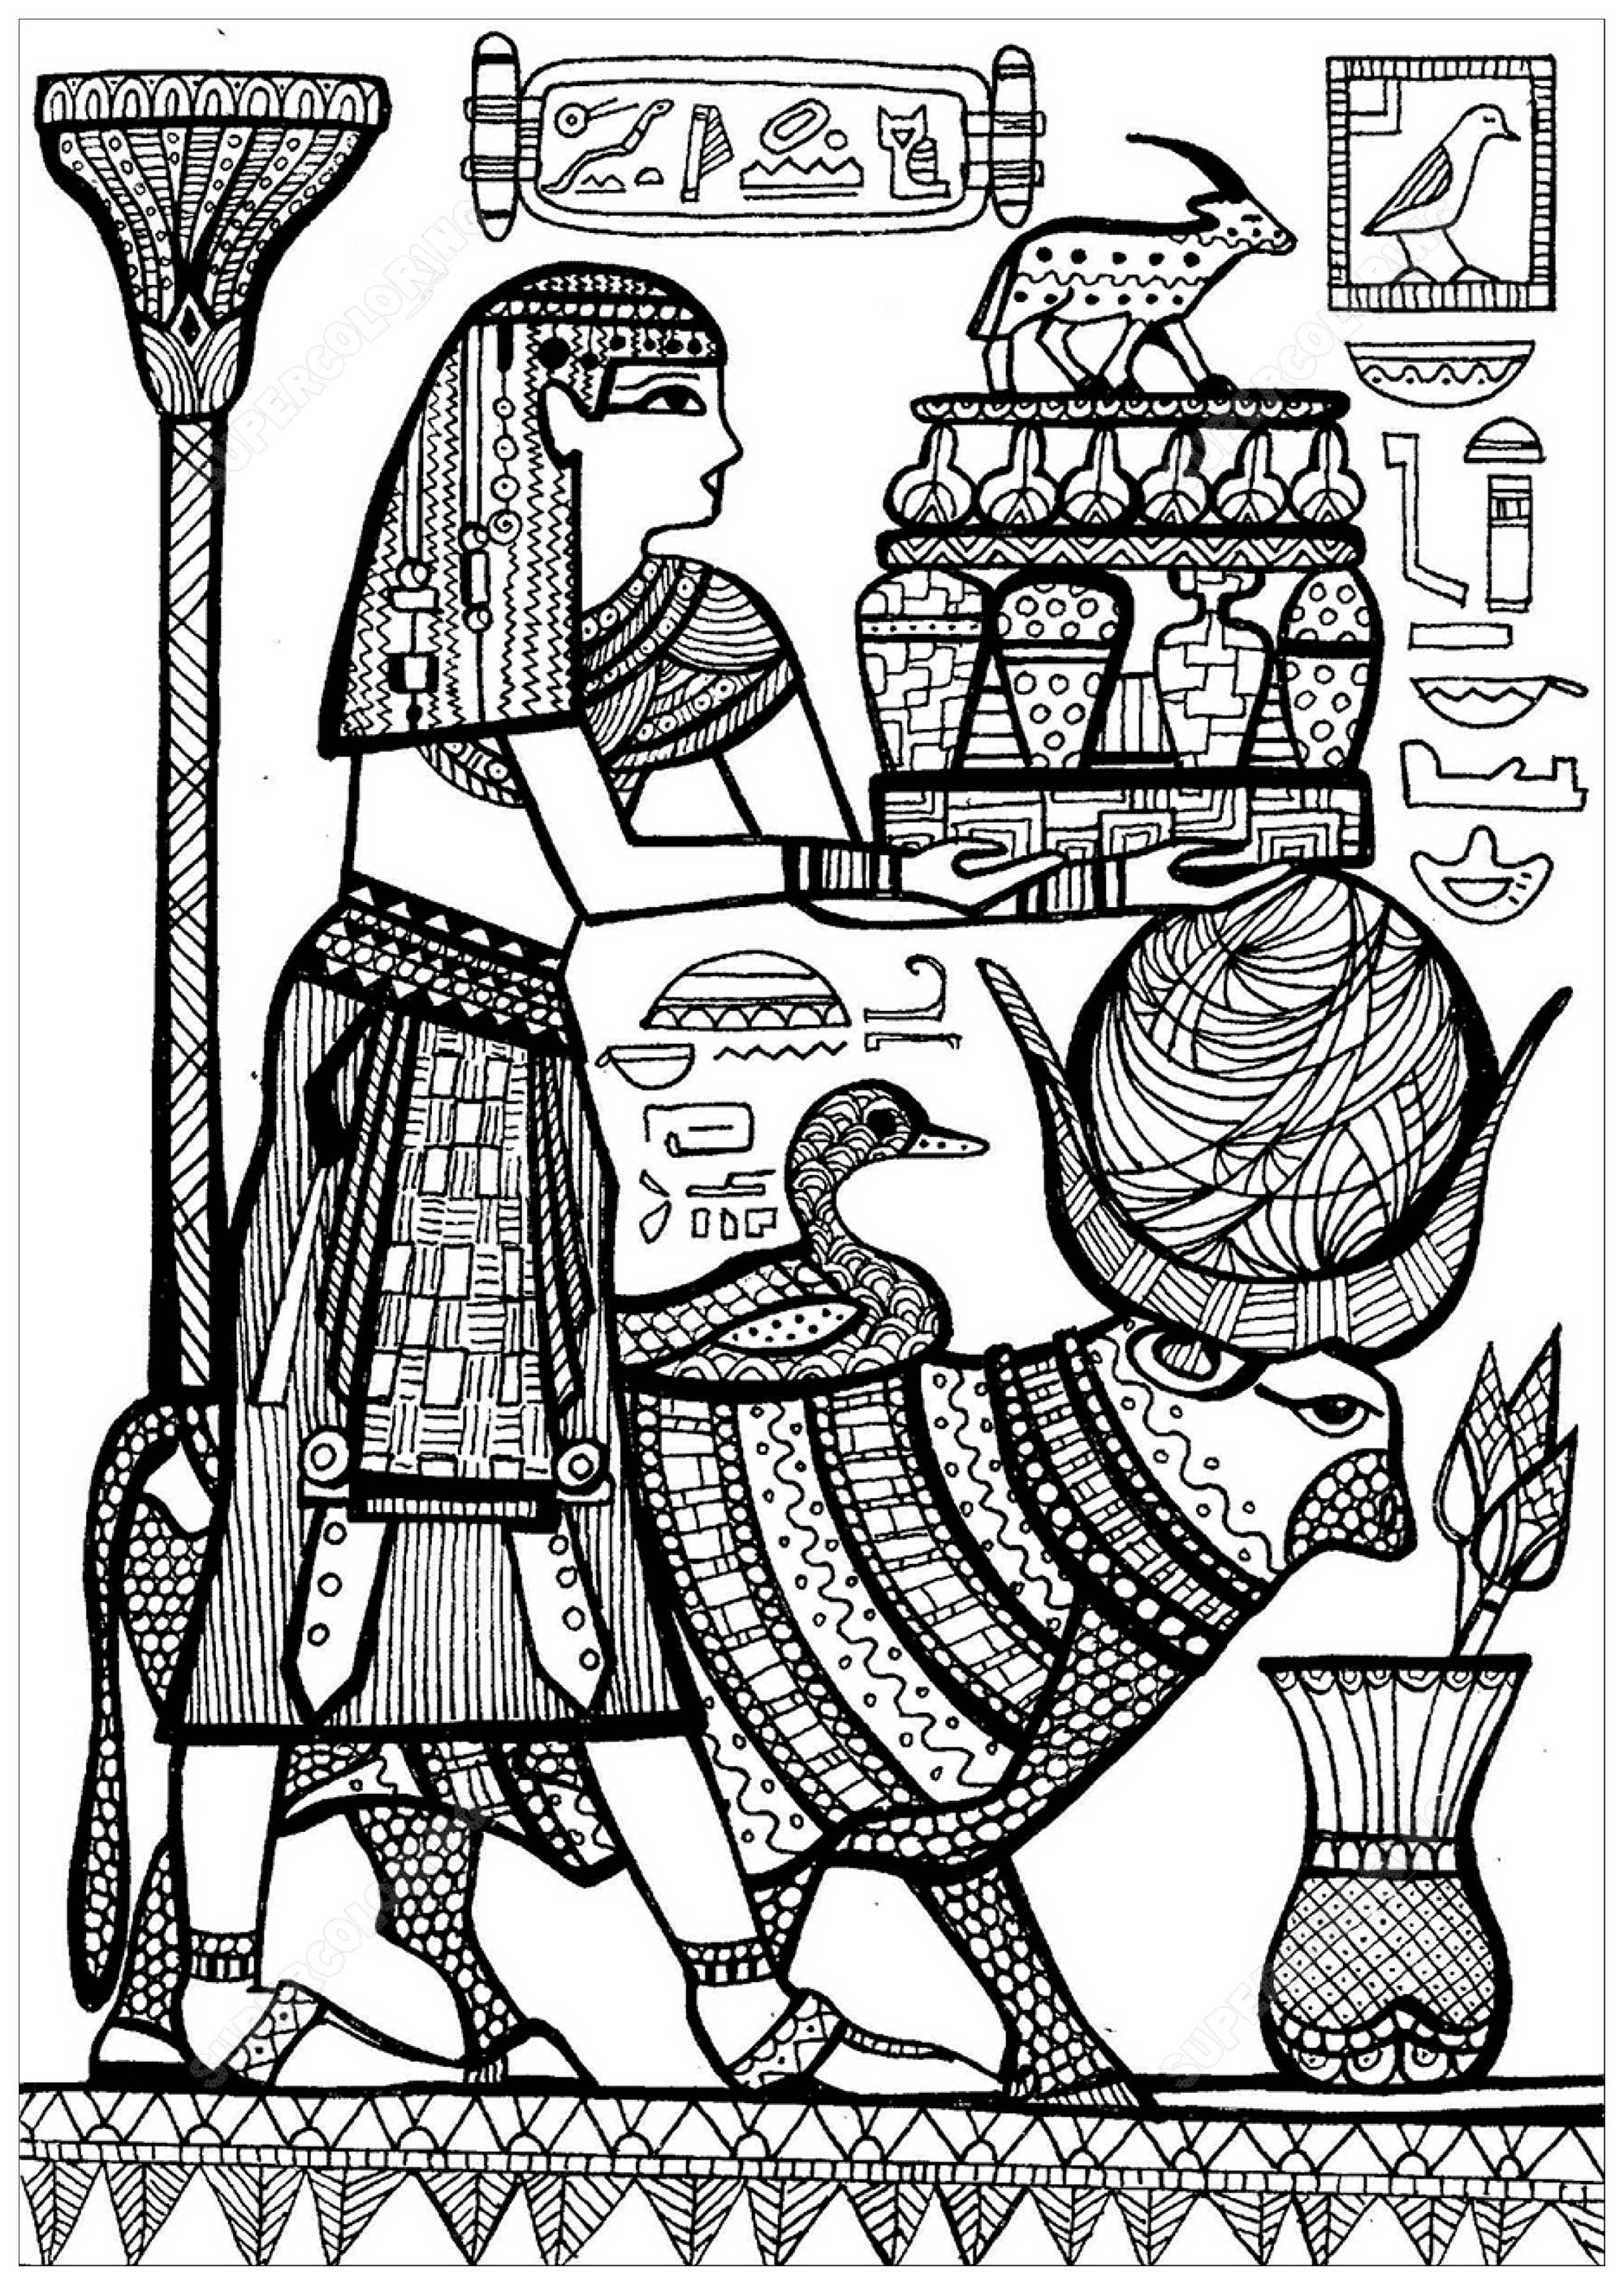 Priest and sacred animals of ancient egypt - Egypt Adult ...